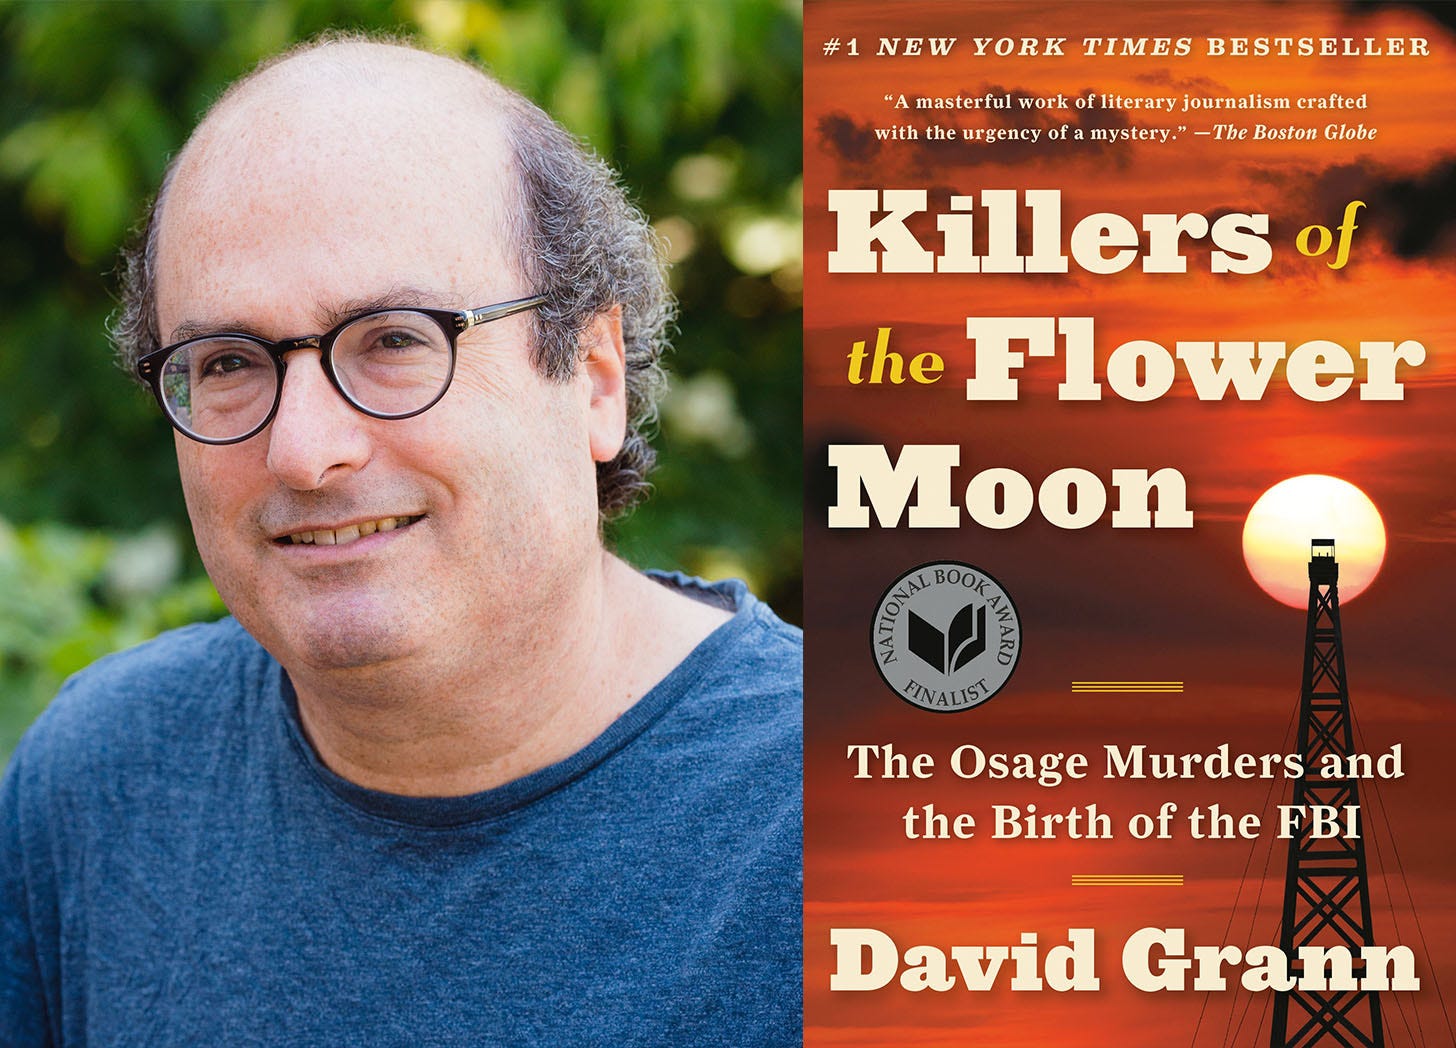 A portrait of author David Grann side by side with the cover of his book, Killers of the Flower Moon, which was adapted into a film by Martin Scorsese and starring Leonardo DiCaprio